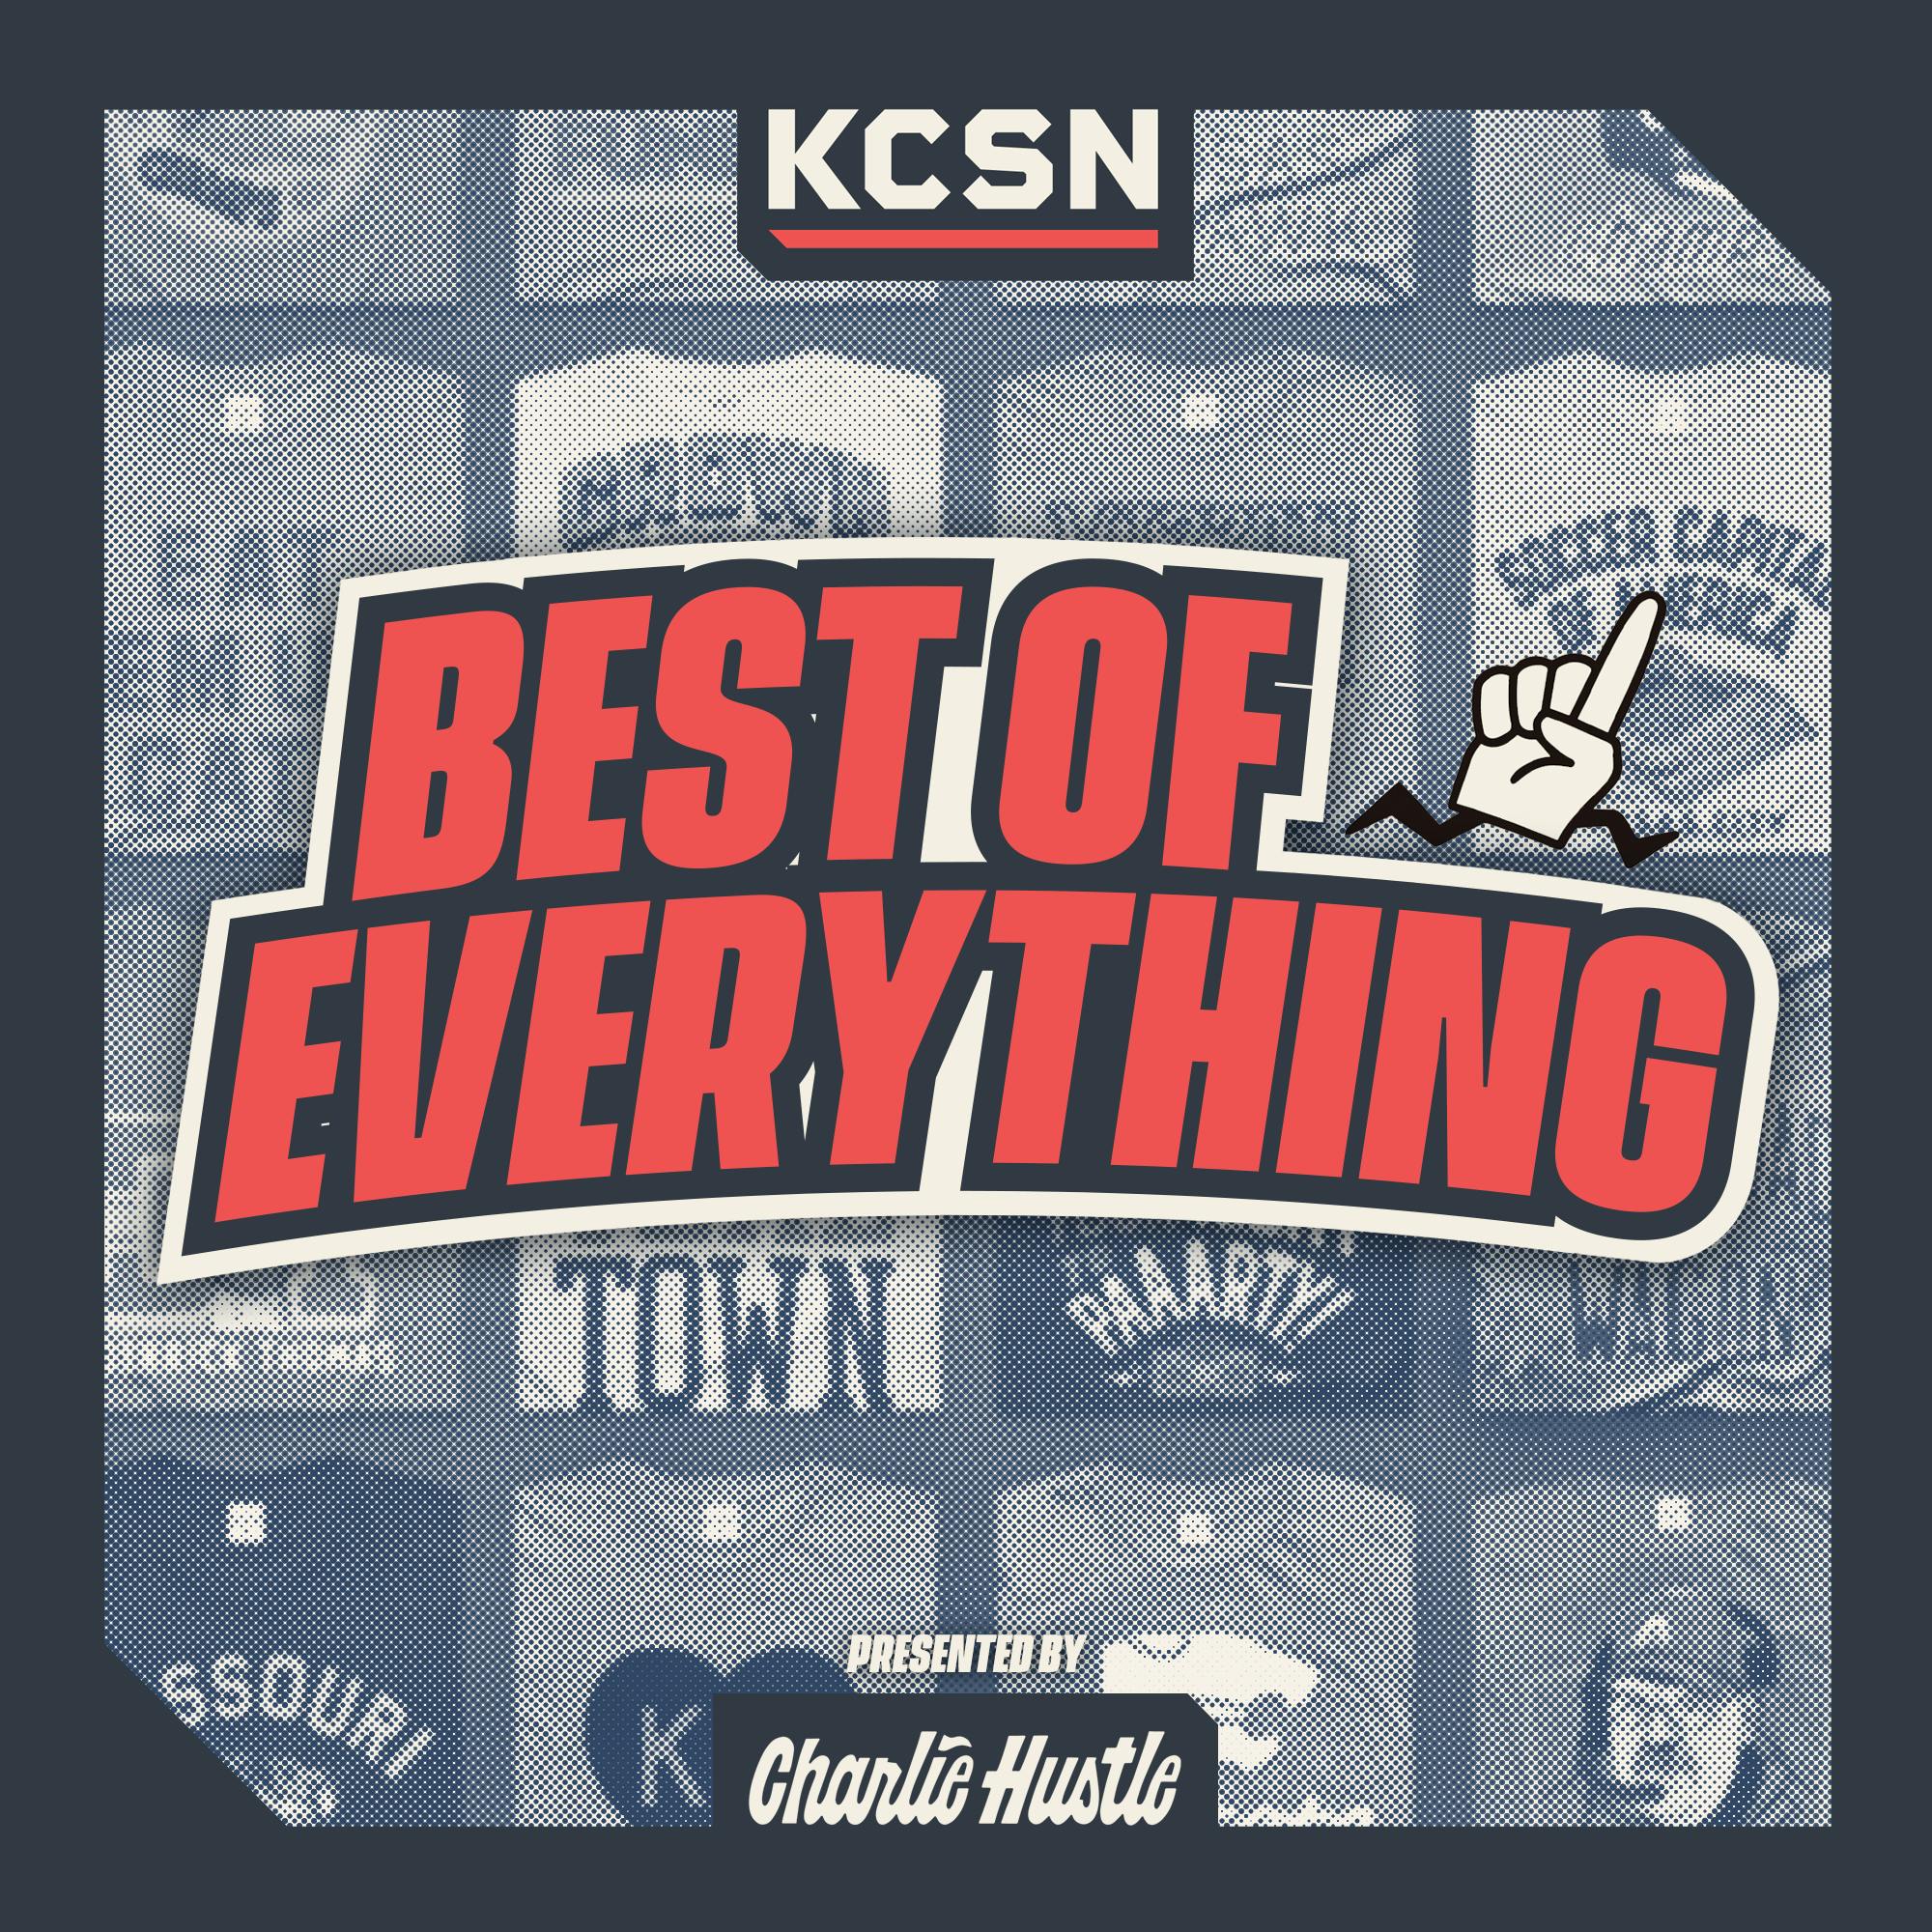 Chiefs Back in Primetime to Take on Chargers | Best of Everything 11/18